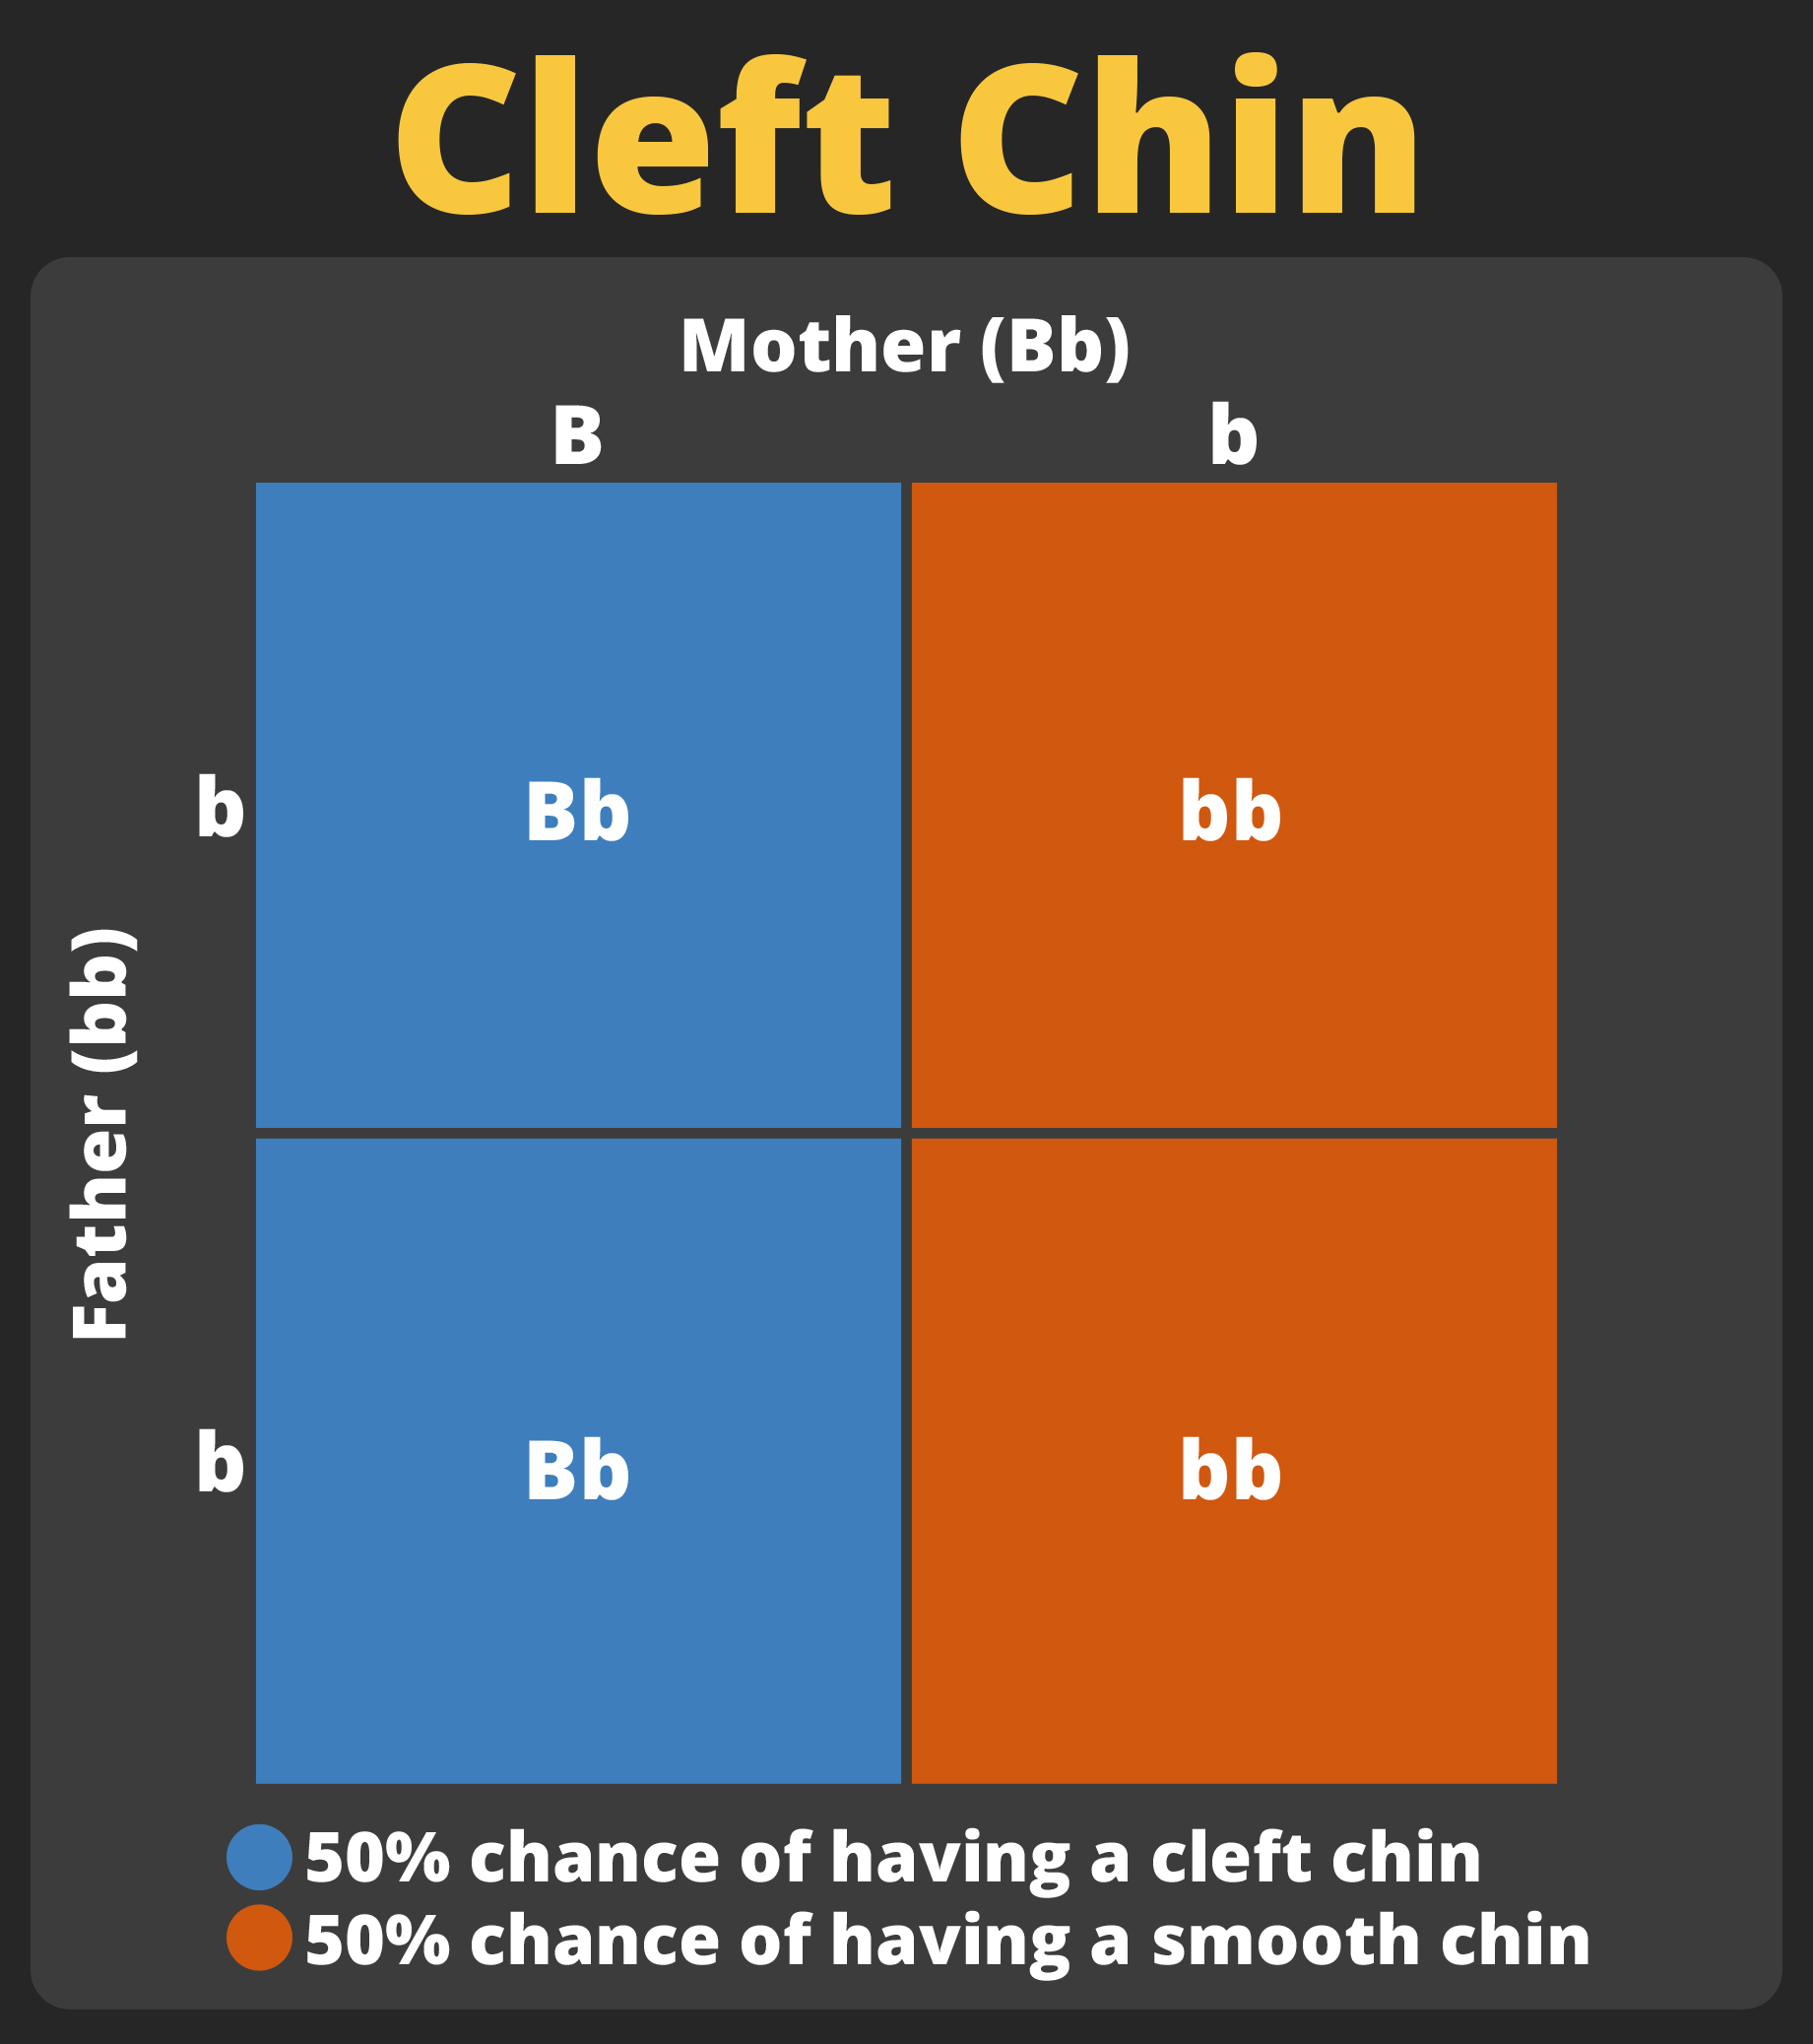 is a cleft chin dominant